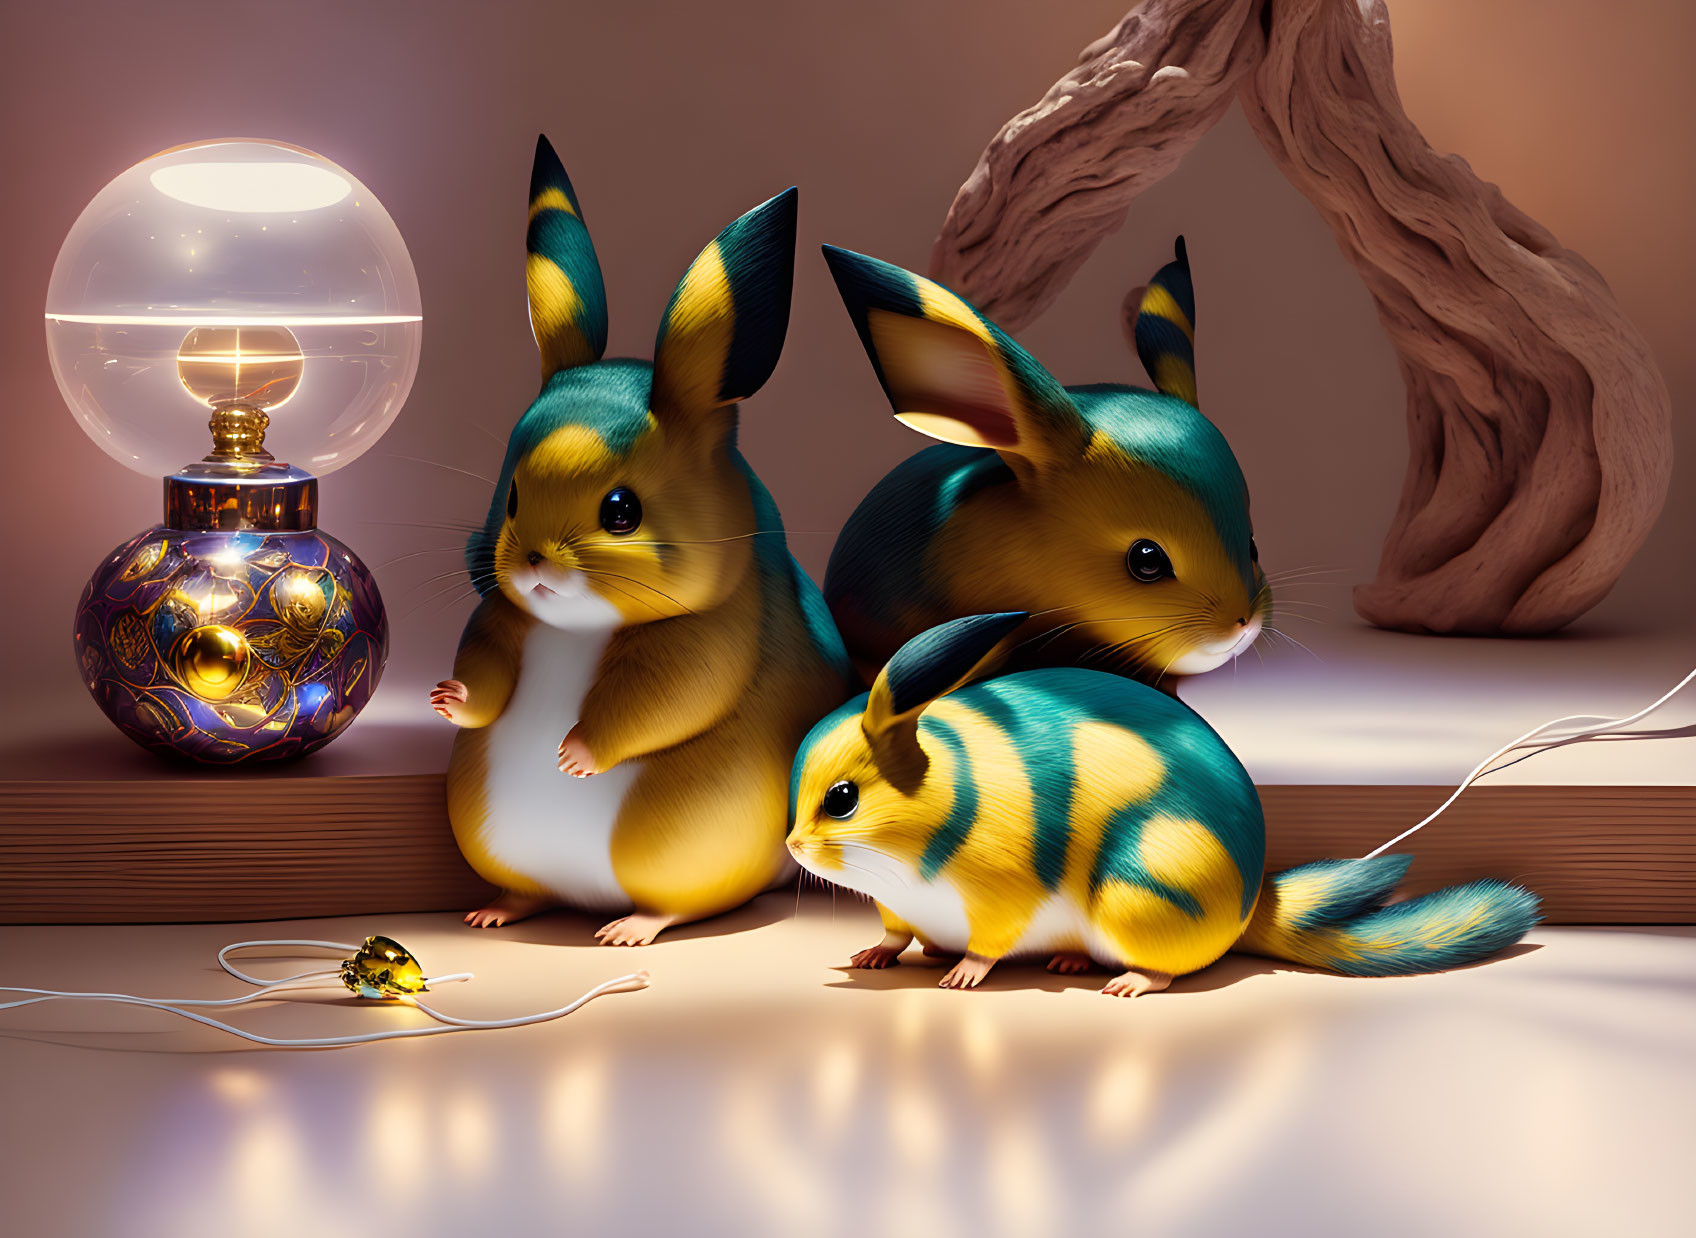 Three stripe-patterned creatures gaze at a glowing orb with a smaller creature inside